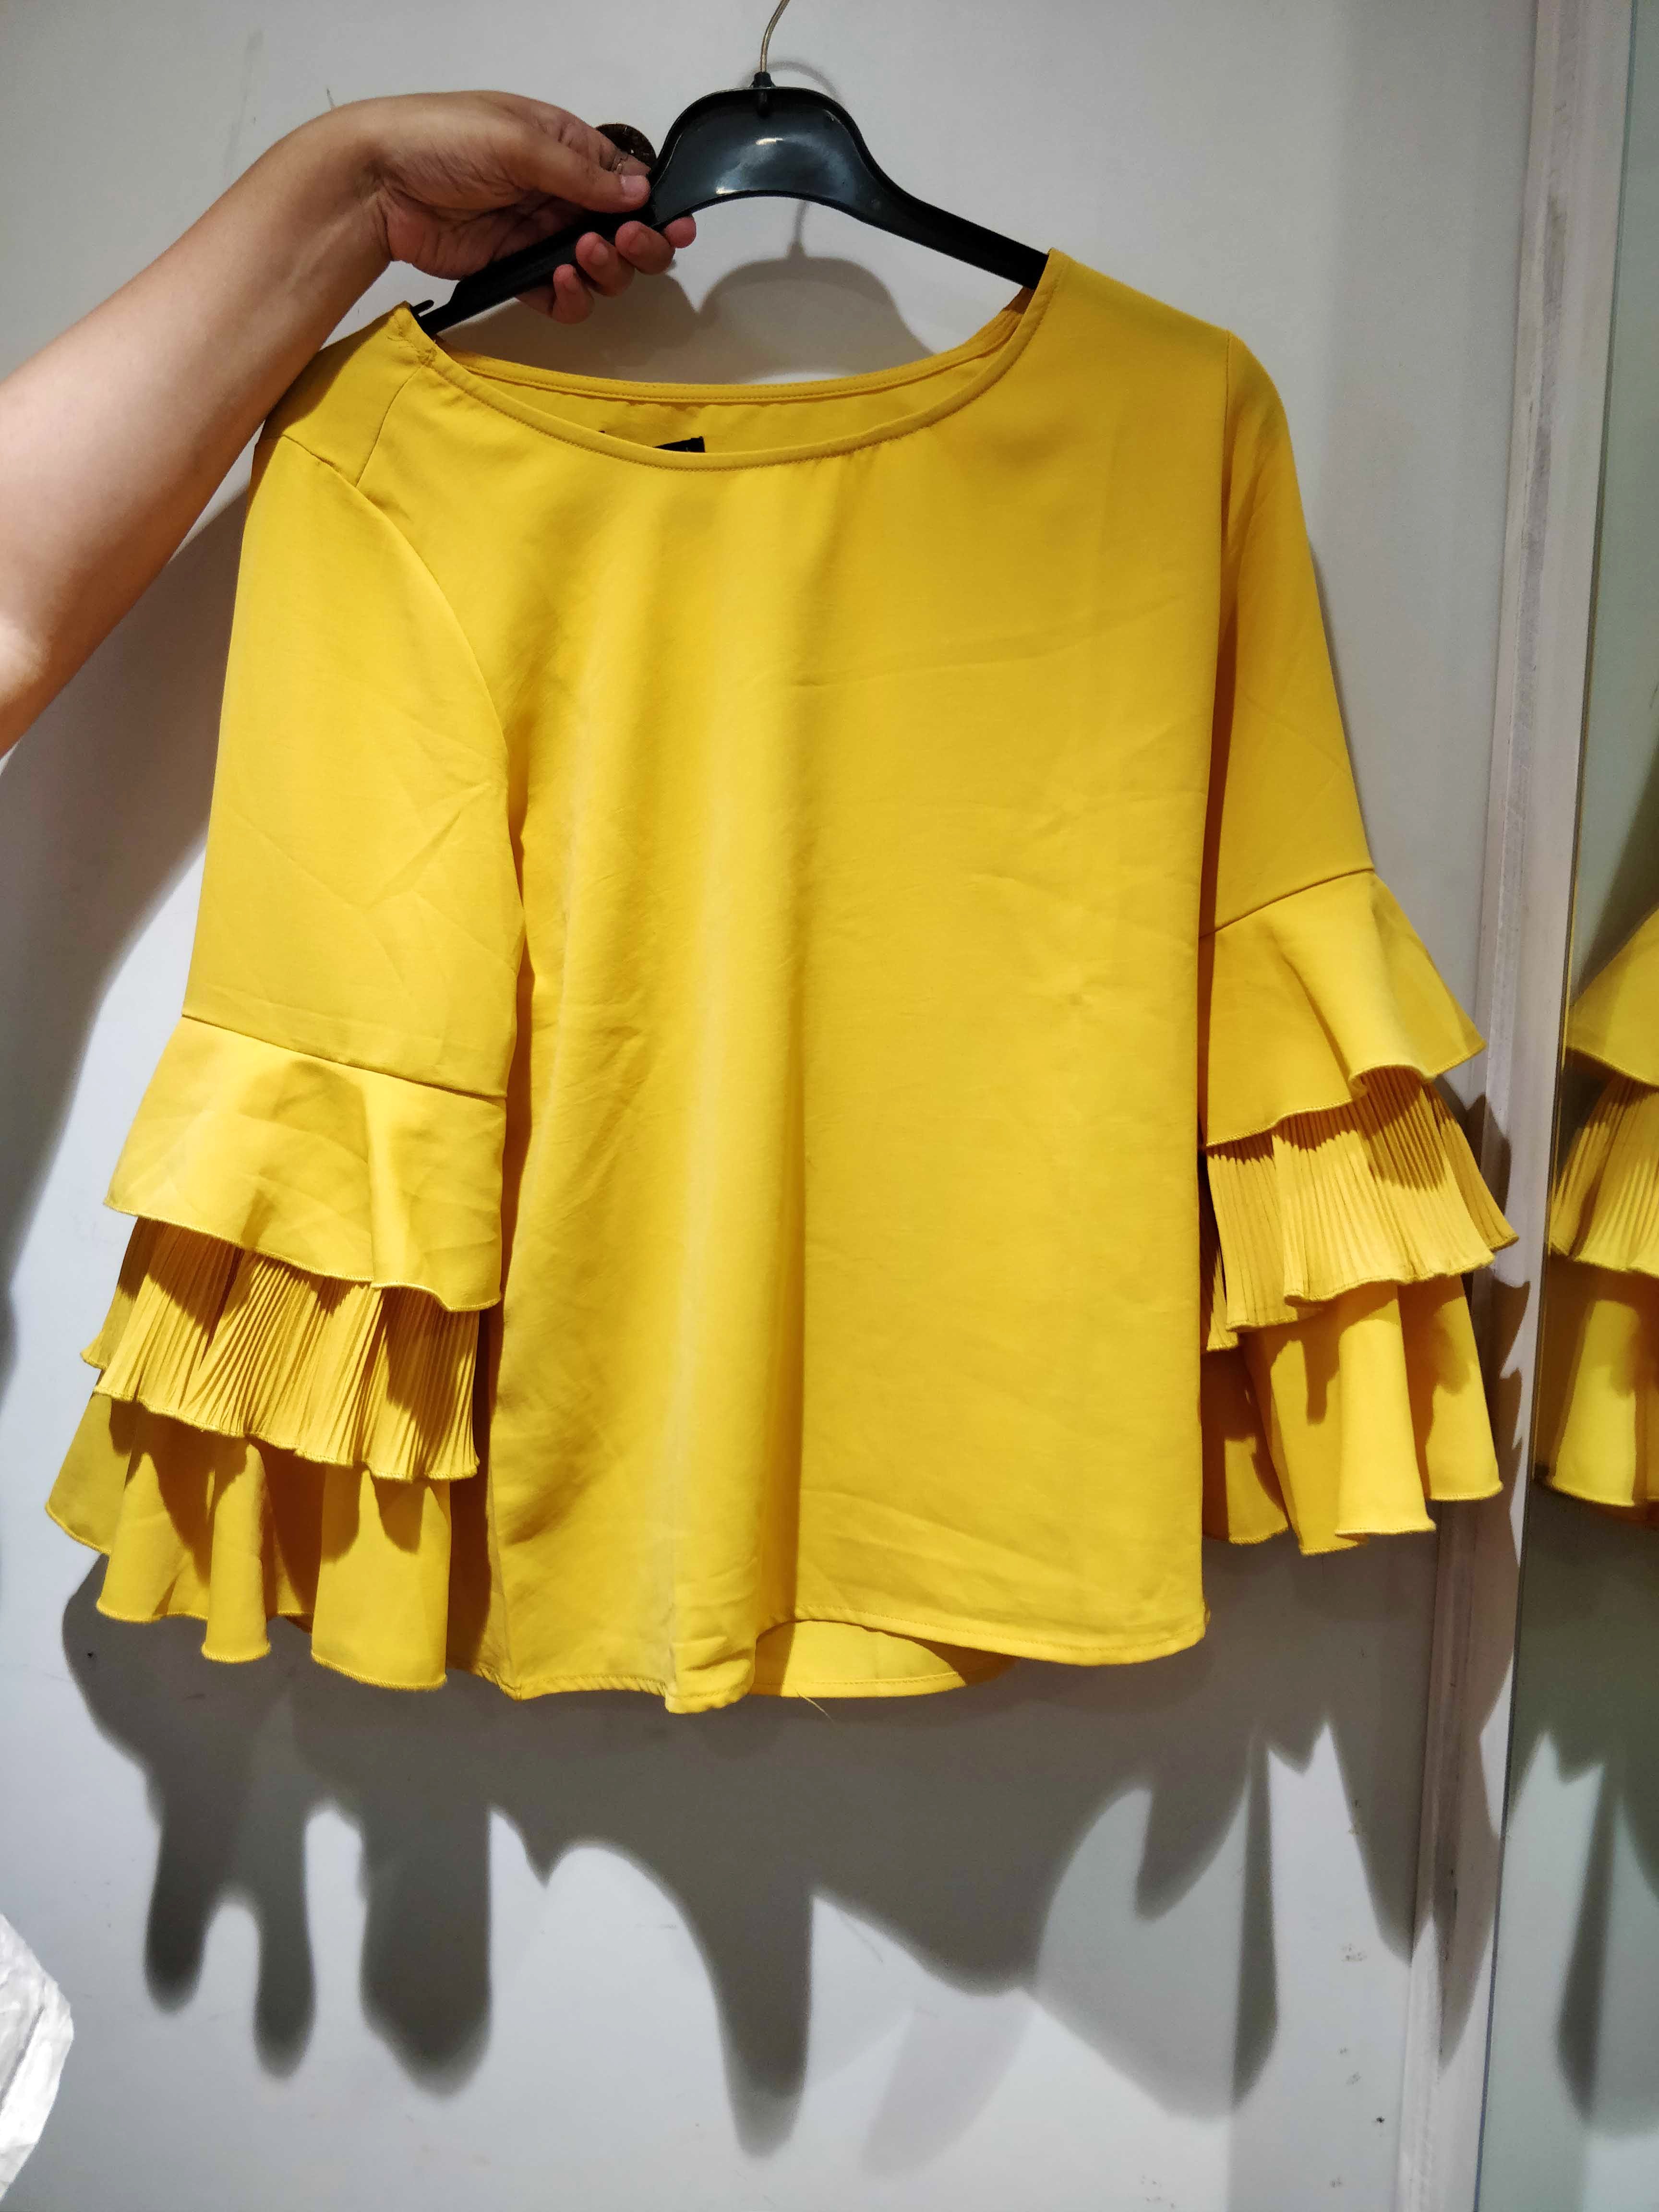 Clothing,Yellow,Clothes hanger,Outerwear,Sleeve,Blouse,Textile,Pattern,T-shirt,Top